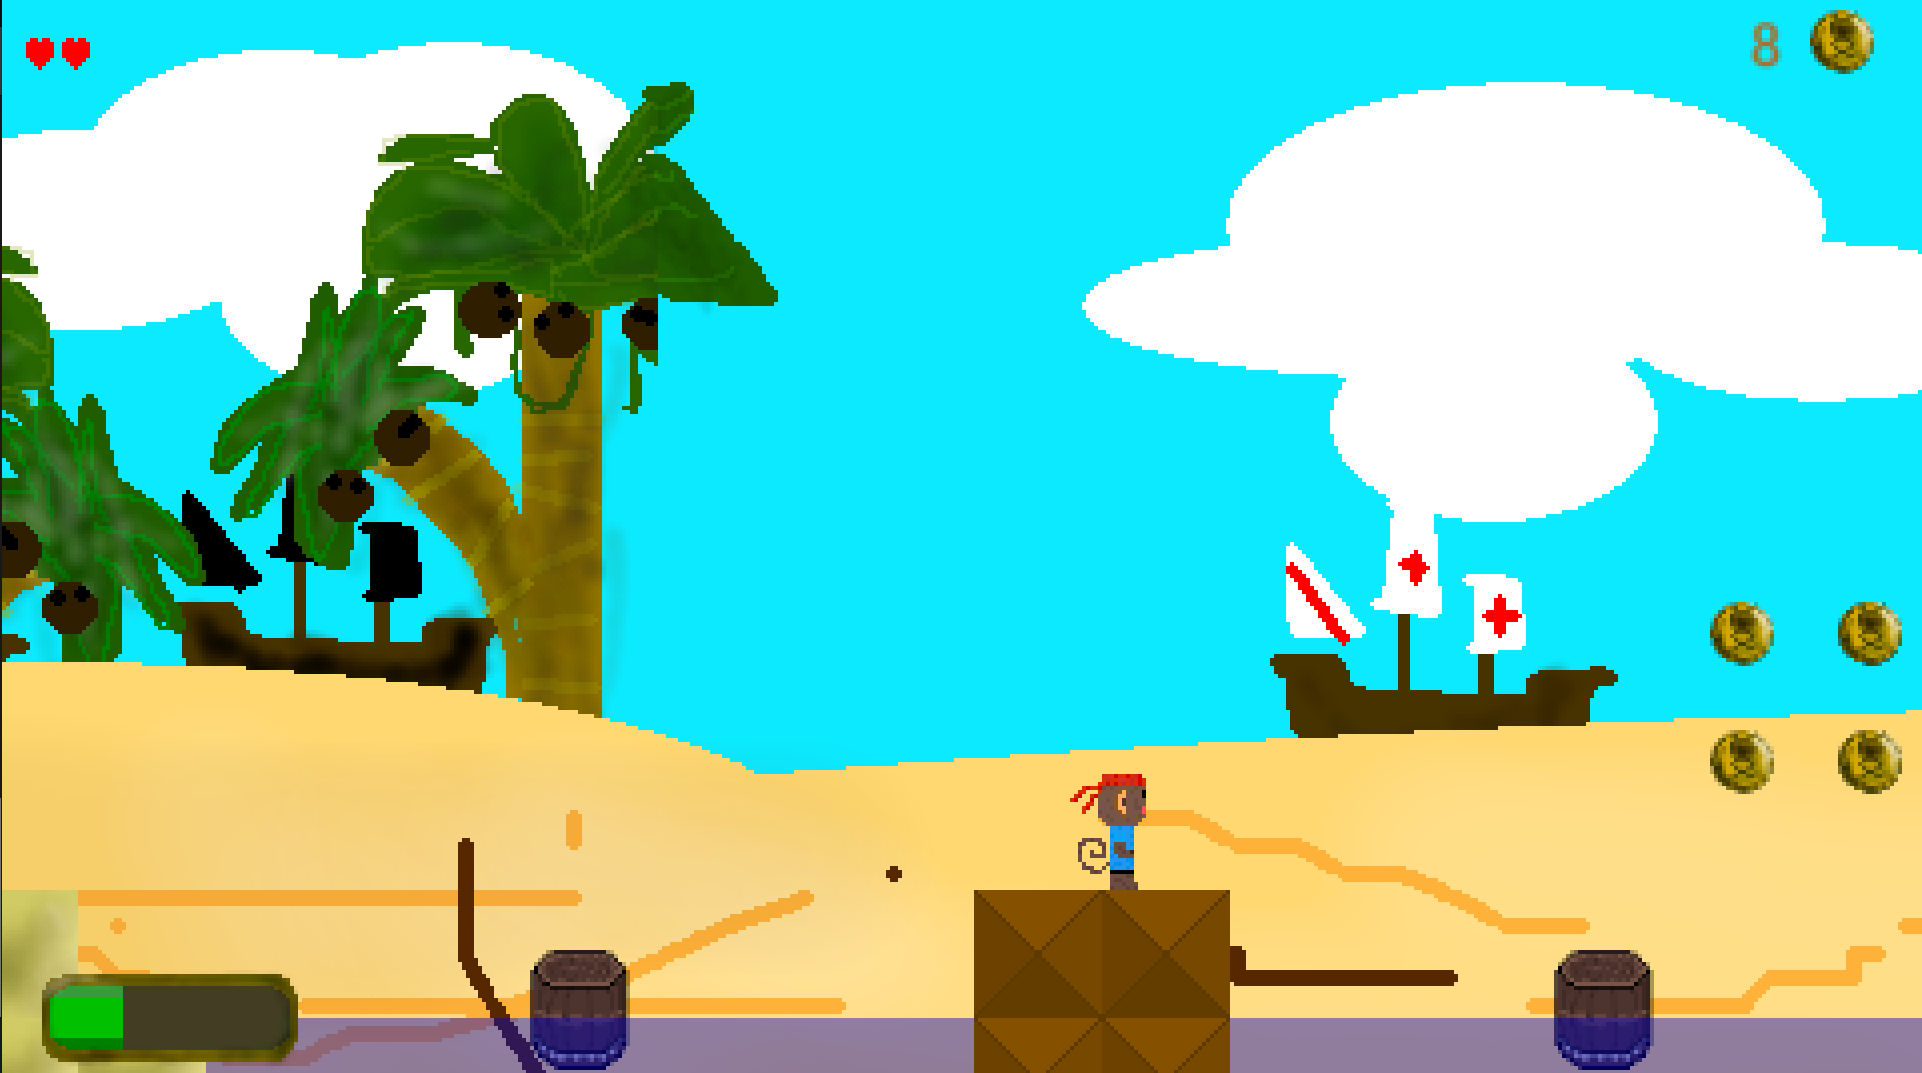 Primate Piracy by stormchasergb for GMTK Game Jam 2020 itch.io